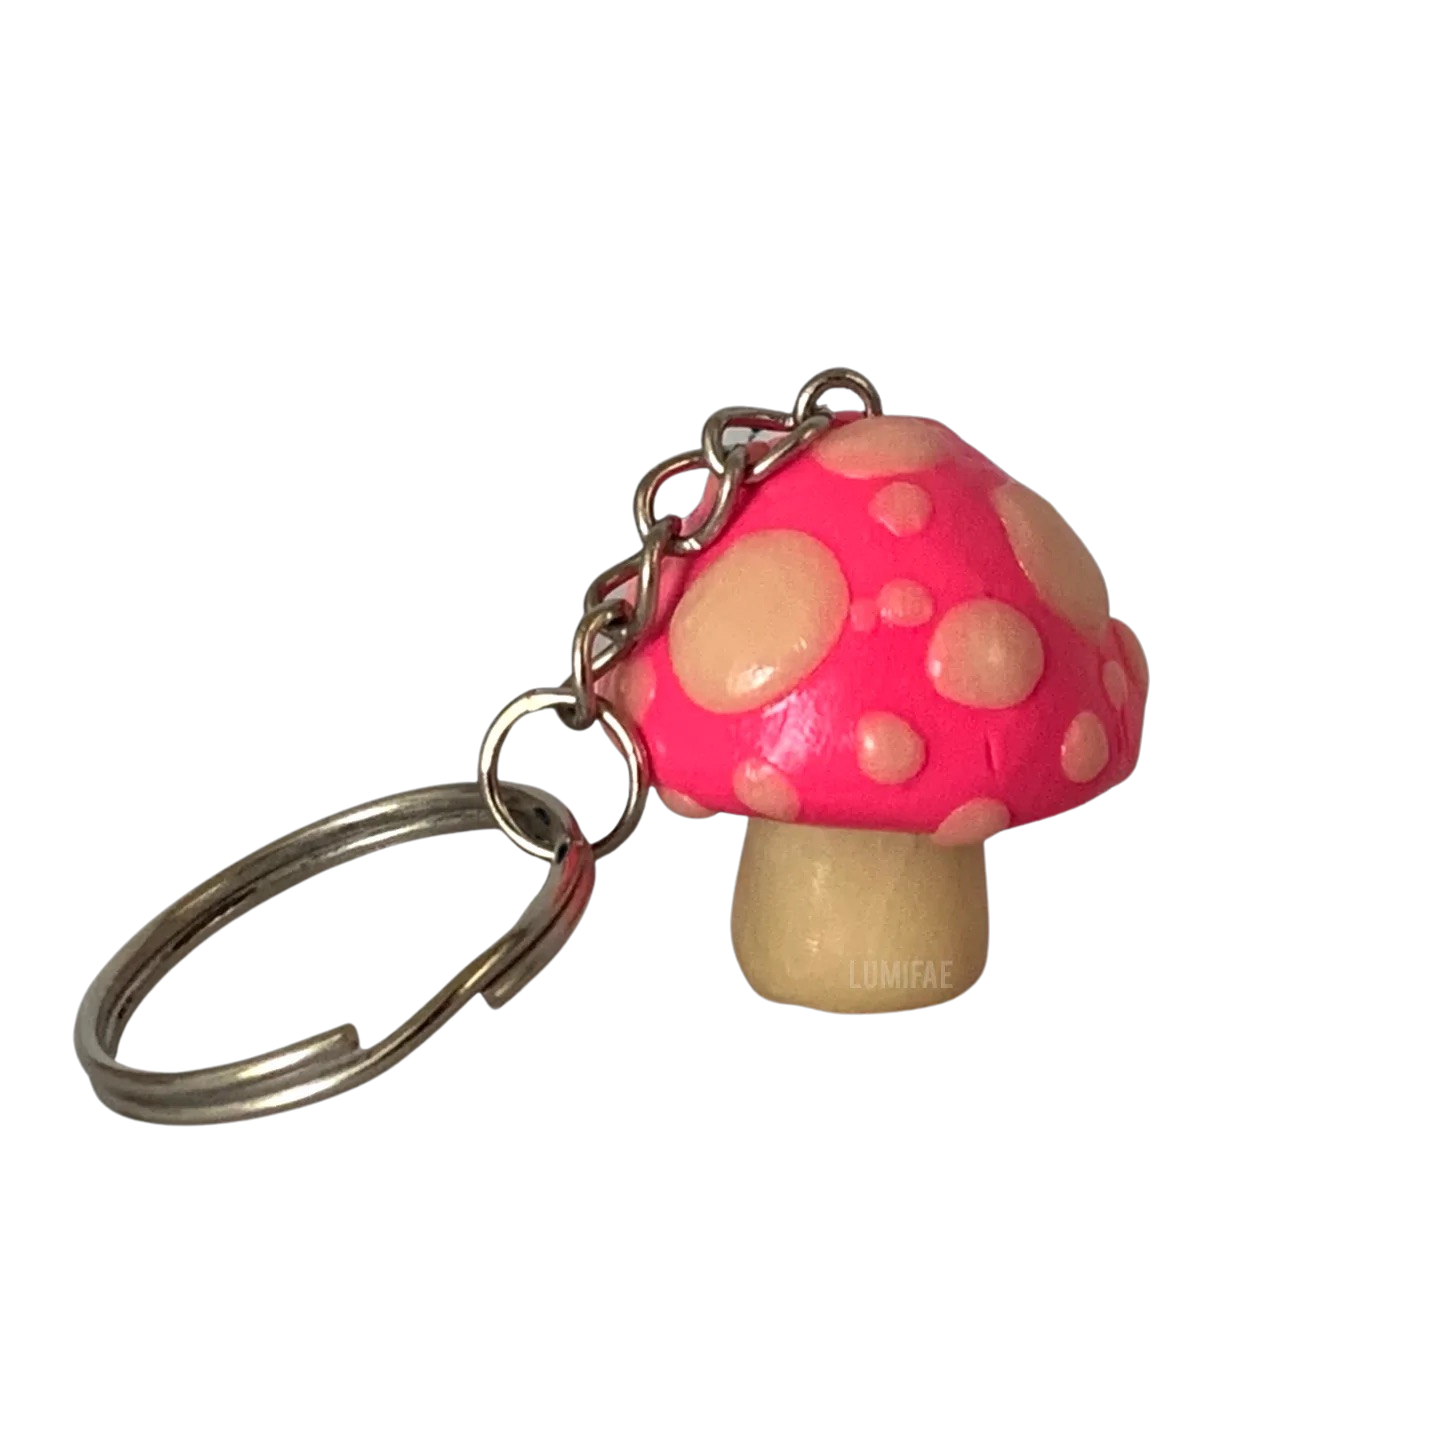 Bright Pink and Glow-in-the-Dark Spotted Mushroom Keychains, cute, cartoon, stylized, Blacklight, UV reactive, glow